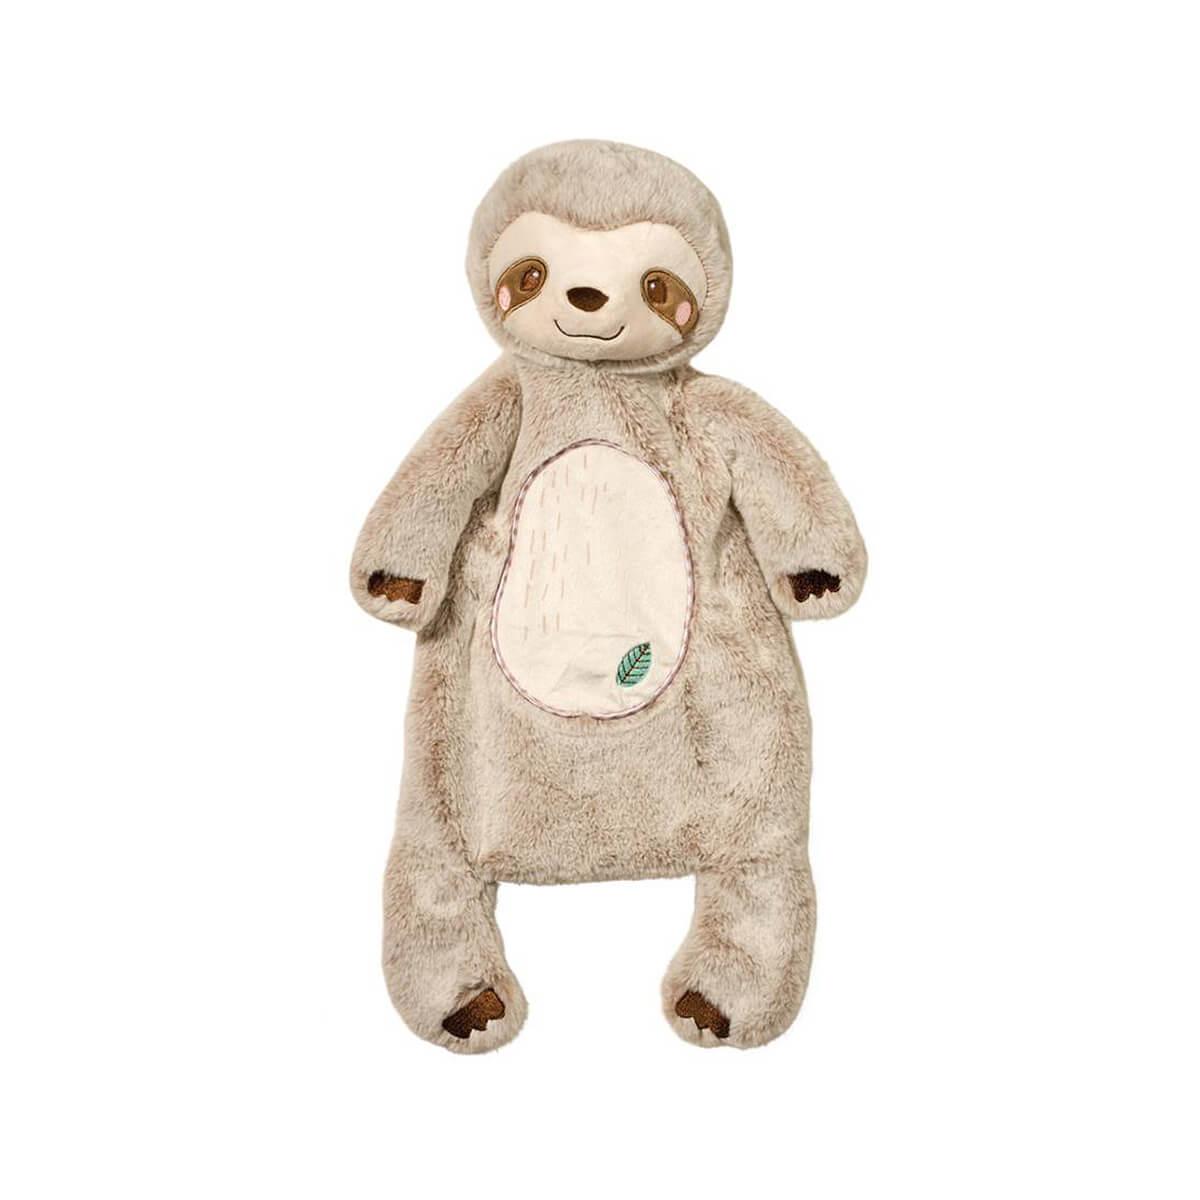  Silly Little Sloth Sshlumpie Plush Toy